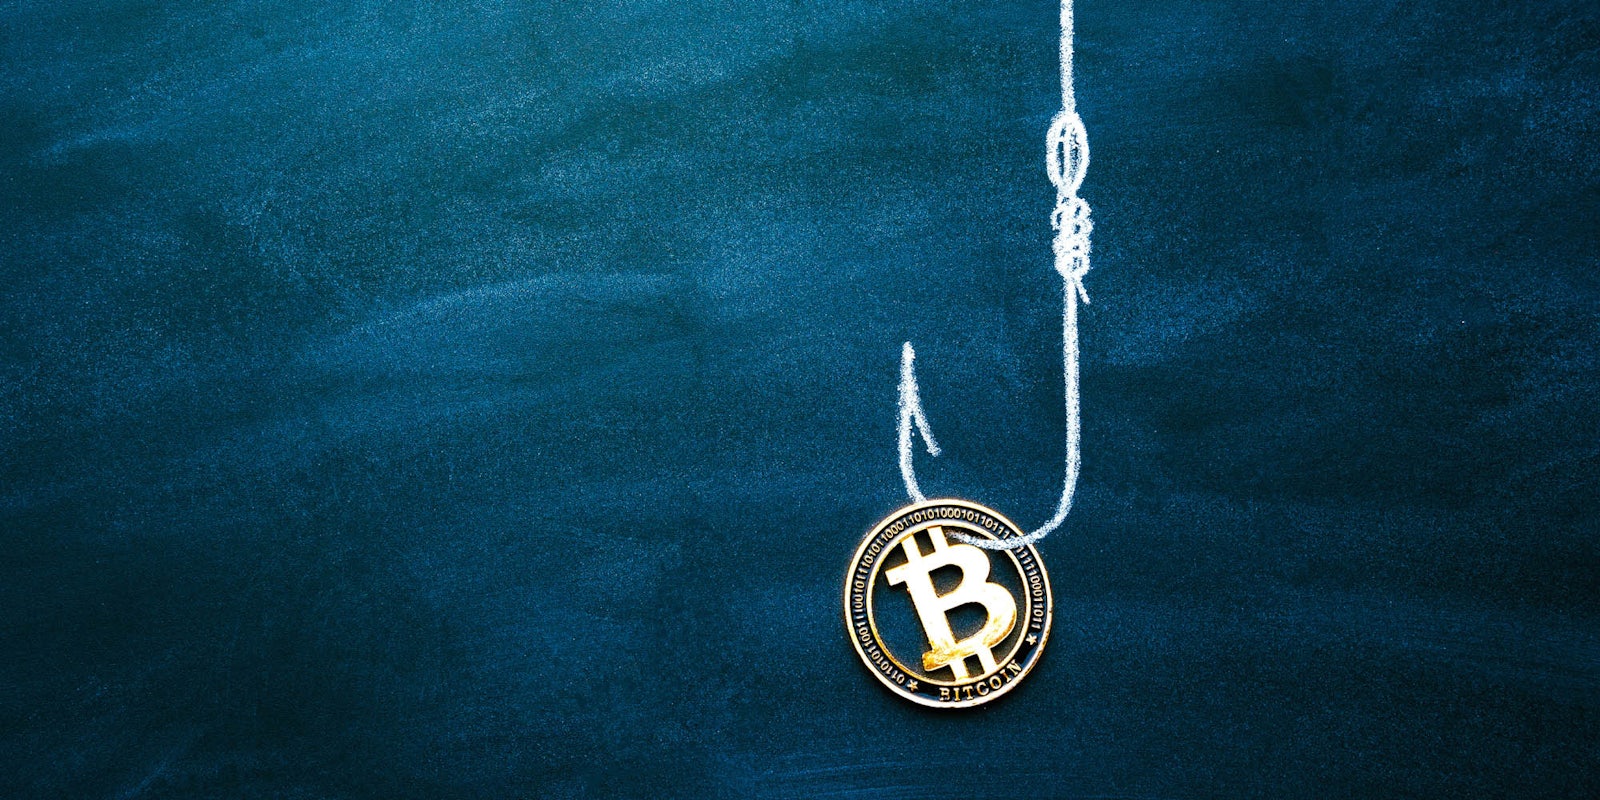 A Bitcoin on the end of a fishing line and hook. It is meant to represent a cryptocurrency scam.